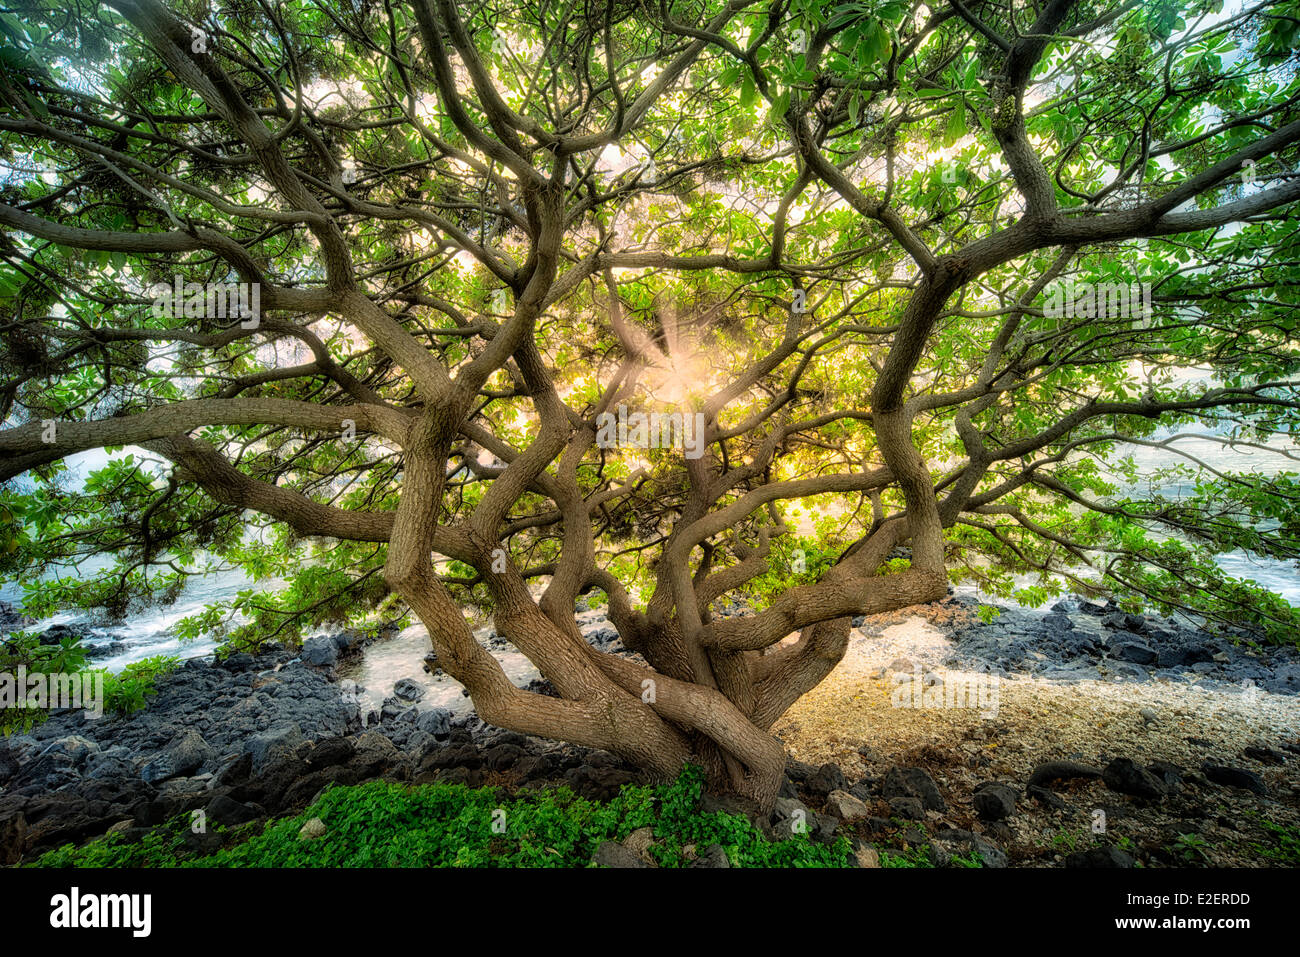 Unidentified wildly branching tree at sunset. Maui, Hawaii Stock Photo